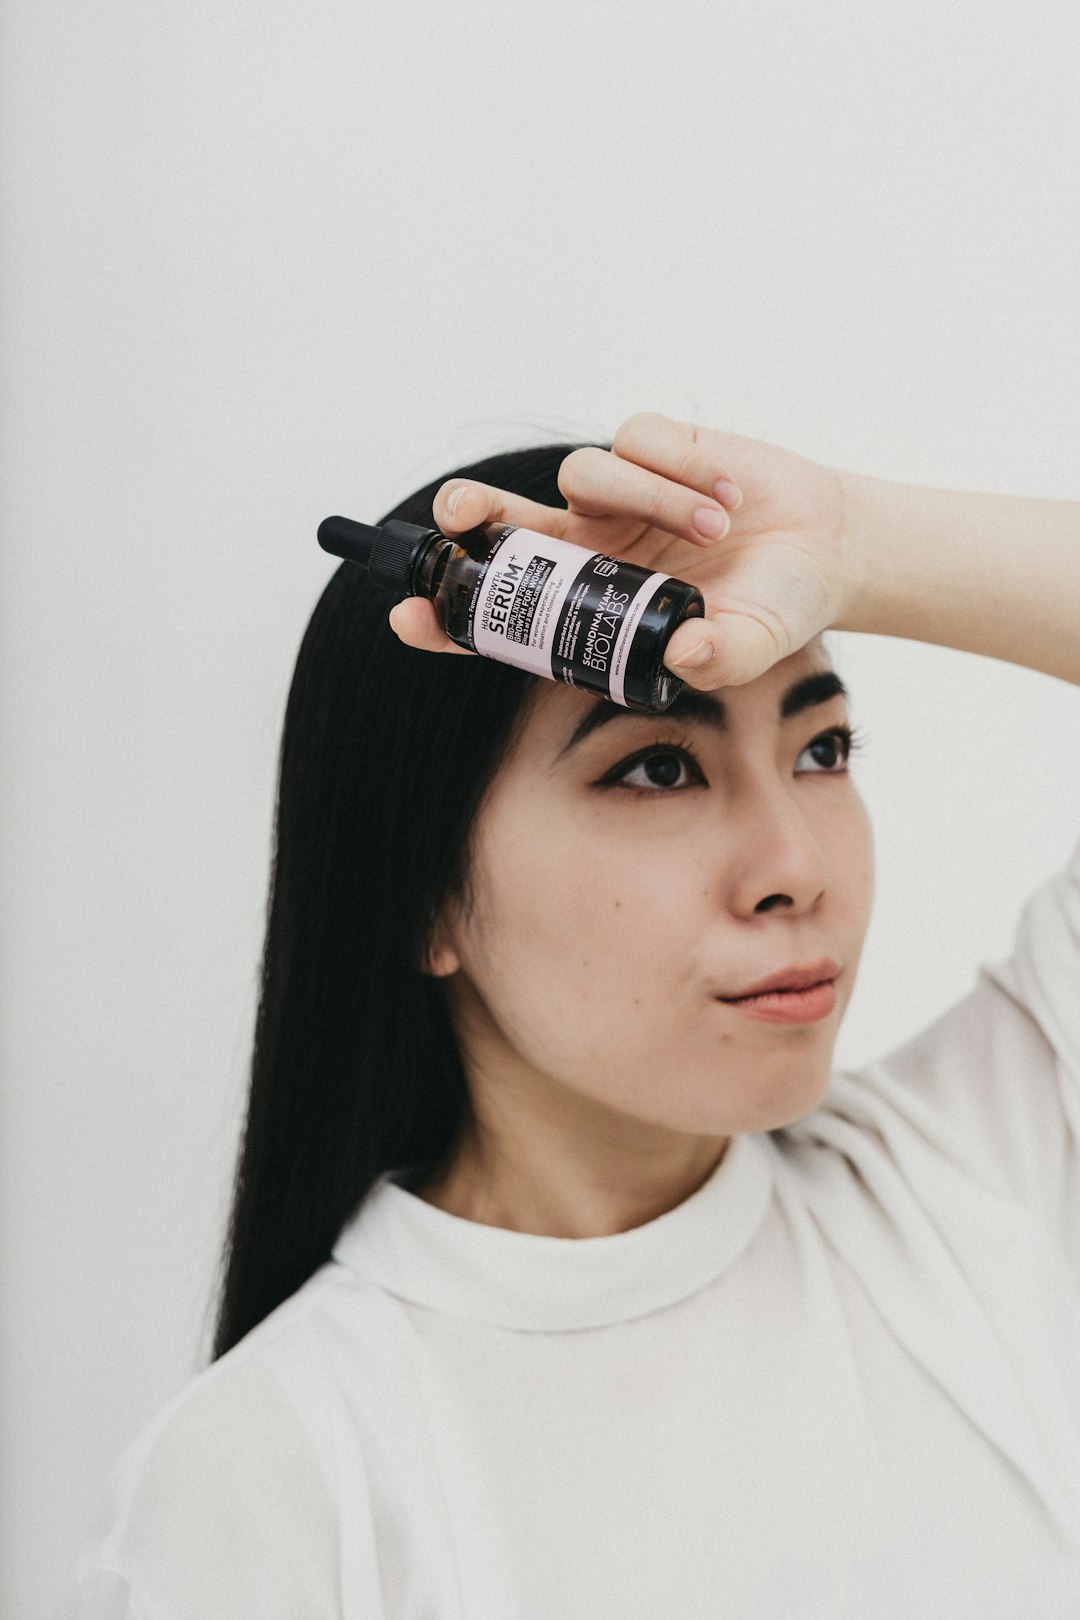 woman in white crew neck shirt holding black and white labeled bottle